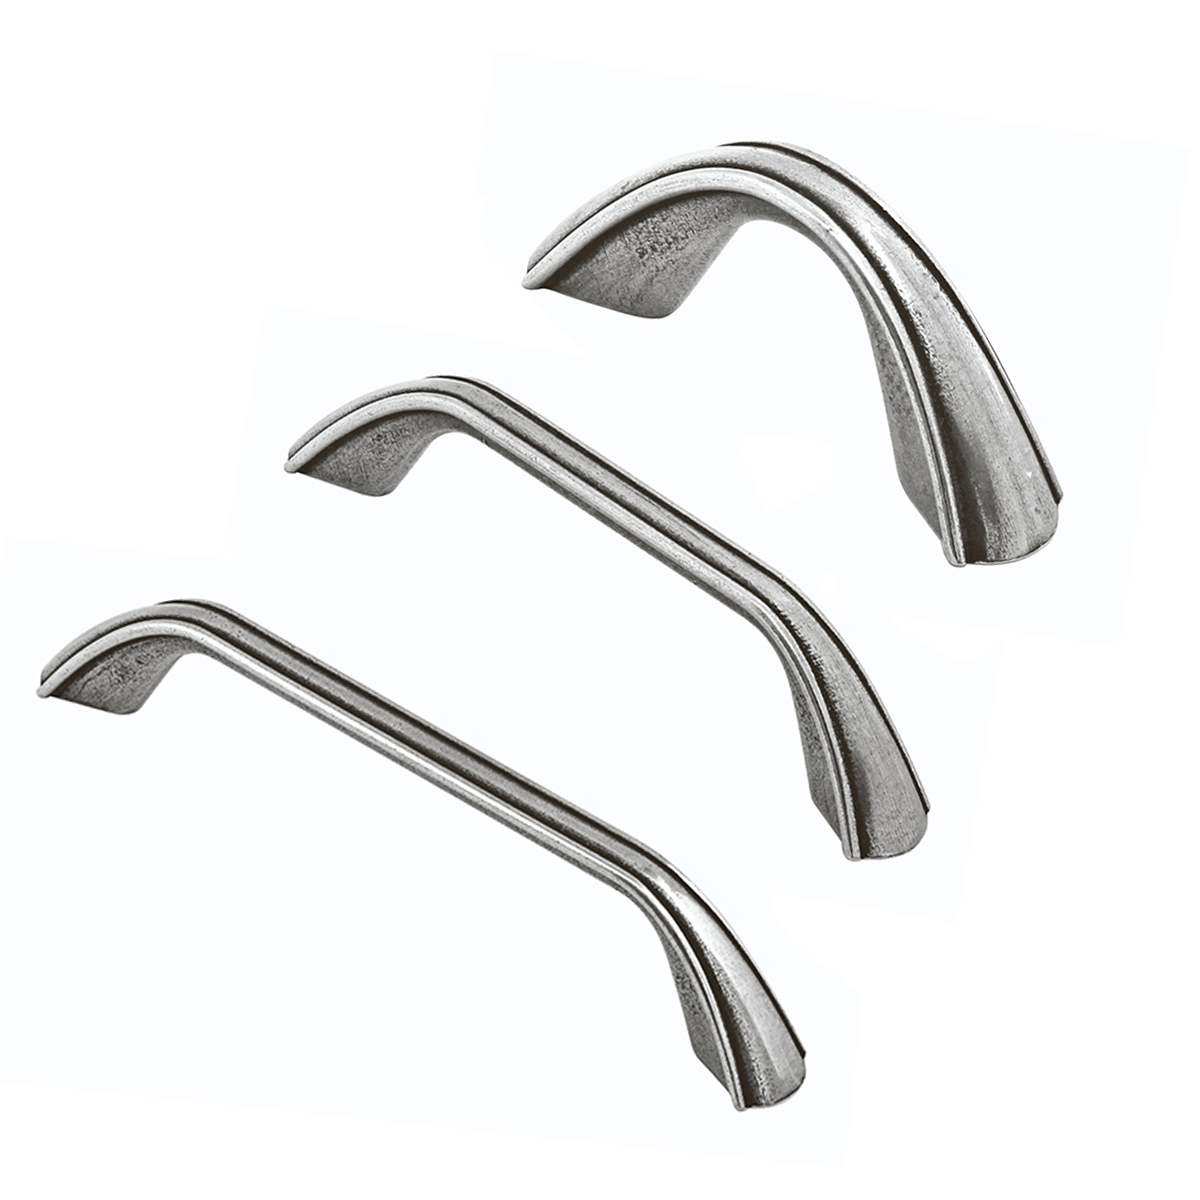 Contemporary kitchen pull handle